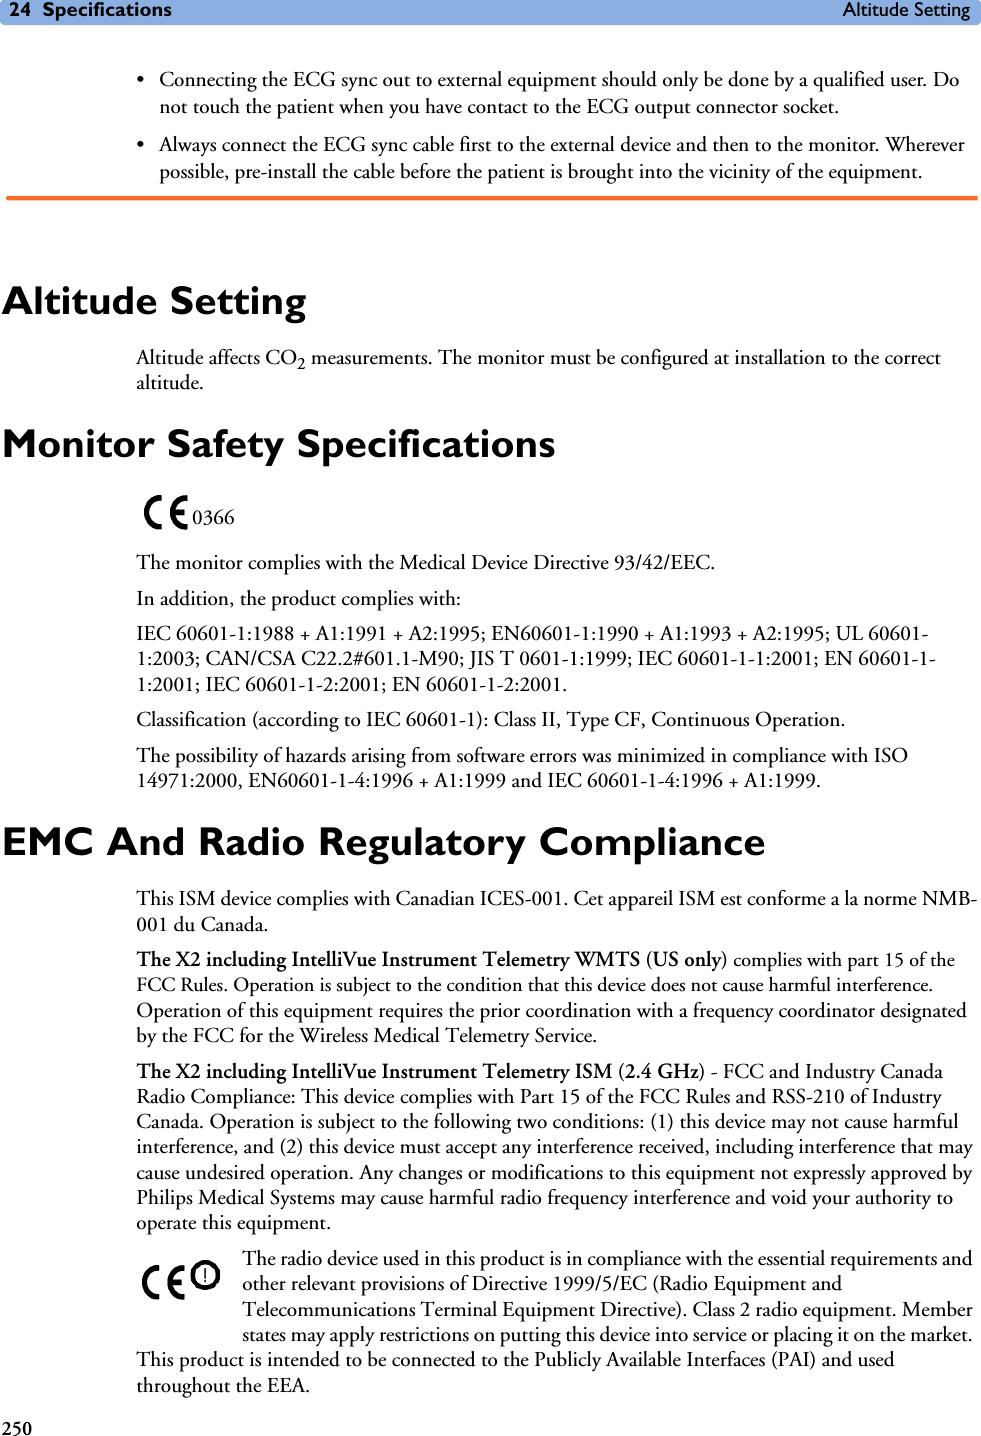 24 Specifications Altitude Setting250• Connecting the ECG sync out to external equipment should only be done by a qualified user. Do not touch the patient when you have contact to the ECG output connector socket.• Always connect the ECG sync cable first to the external device and then to the monitor. Wherever possible, pre-install the cable before the patient is brought into the vicinity of the equipment.Altitude SettingAltitude affects CO2 measurements. The monitor must be configured at installation to the correct altitude. Monitor Safety SpecificationsThe monitor complies with the Medical Device Directive 93/42/EEC.In addition, the product complies with:IEC 60601-1:1988 + A1:1991 + A2:1995; EN60601-1:1990 + A1:1993 + A2:1995; UL 60601-1:2003; CAN/CSA C22.2#601.1-M90; JIS T 0601-1:1999; IEC 60601-1-1:2001; EN 60601-1-1:2001; IEC 60601-1-2:2001; EN 60601-1-2:2001.Classification (according to IEC 60601-1): Class II, Type CF, Continuous Operation.The possibility of hazards arising from software errors was minimized in compliance with ISO 14971:2000, EN60601-1-4:1996 + A1:1999 and IEC 60601-1-4:1996 + A1:1999.EMC And Radio Regulatory ComplianceThis ISM device complies with Canadian ICES-001. Cet appareil ISM est conforme a la norme NMB-001 du Canada.The X2 including IntelliVue Instrument Telemetry WMTS (US only) complies with part 15 of the FCC Rules. Operation is subject to the condition that this device does not cause harmful interference. Operation of this equipment requires the prior coordination with a frequency coordinator designated by the FCC for the Wireless Medical Telemetry Service.The X2 including IntelliVue Instrument Telemetry ISM (2.4 GHz) - FCC and Industry Canada Radio Compliance: This device complies with Part 15 of the FCC Rules and RSS-210 of Industry Canada. Operation is subject to the following two conditions: (1) this device may not cause harmful interference, and (2) this device must accept any interference received, including interference that may cause undesired operation. Any changes or modifications to this equipment not expressly approved by Philips Medical Systems may cause harmful radio frequency interference and void your authority to operate this equipment.The radio device used in this product is in compliance with the essential requirements and other relevant provisions of Directive 1999/5/EC (Radio Equipment and Telecommunications Terminal Equipment Directive). Class 2 radio equipment. Member states may apply restrictions on putting this device into service or placing it on the market. This product is intended to be connected to the Publicly Available Interfaces (PAI) and used throughout the EEA.0366